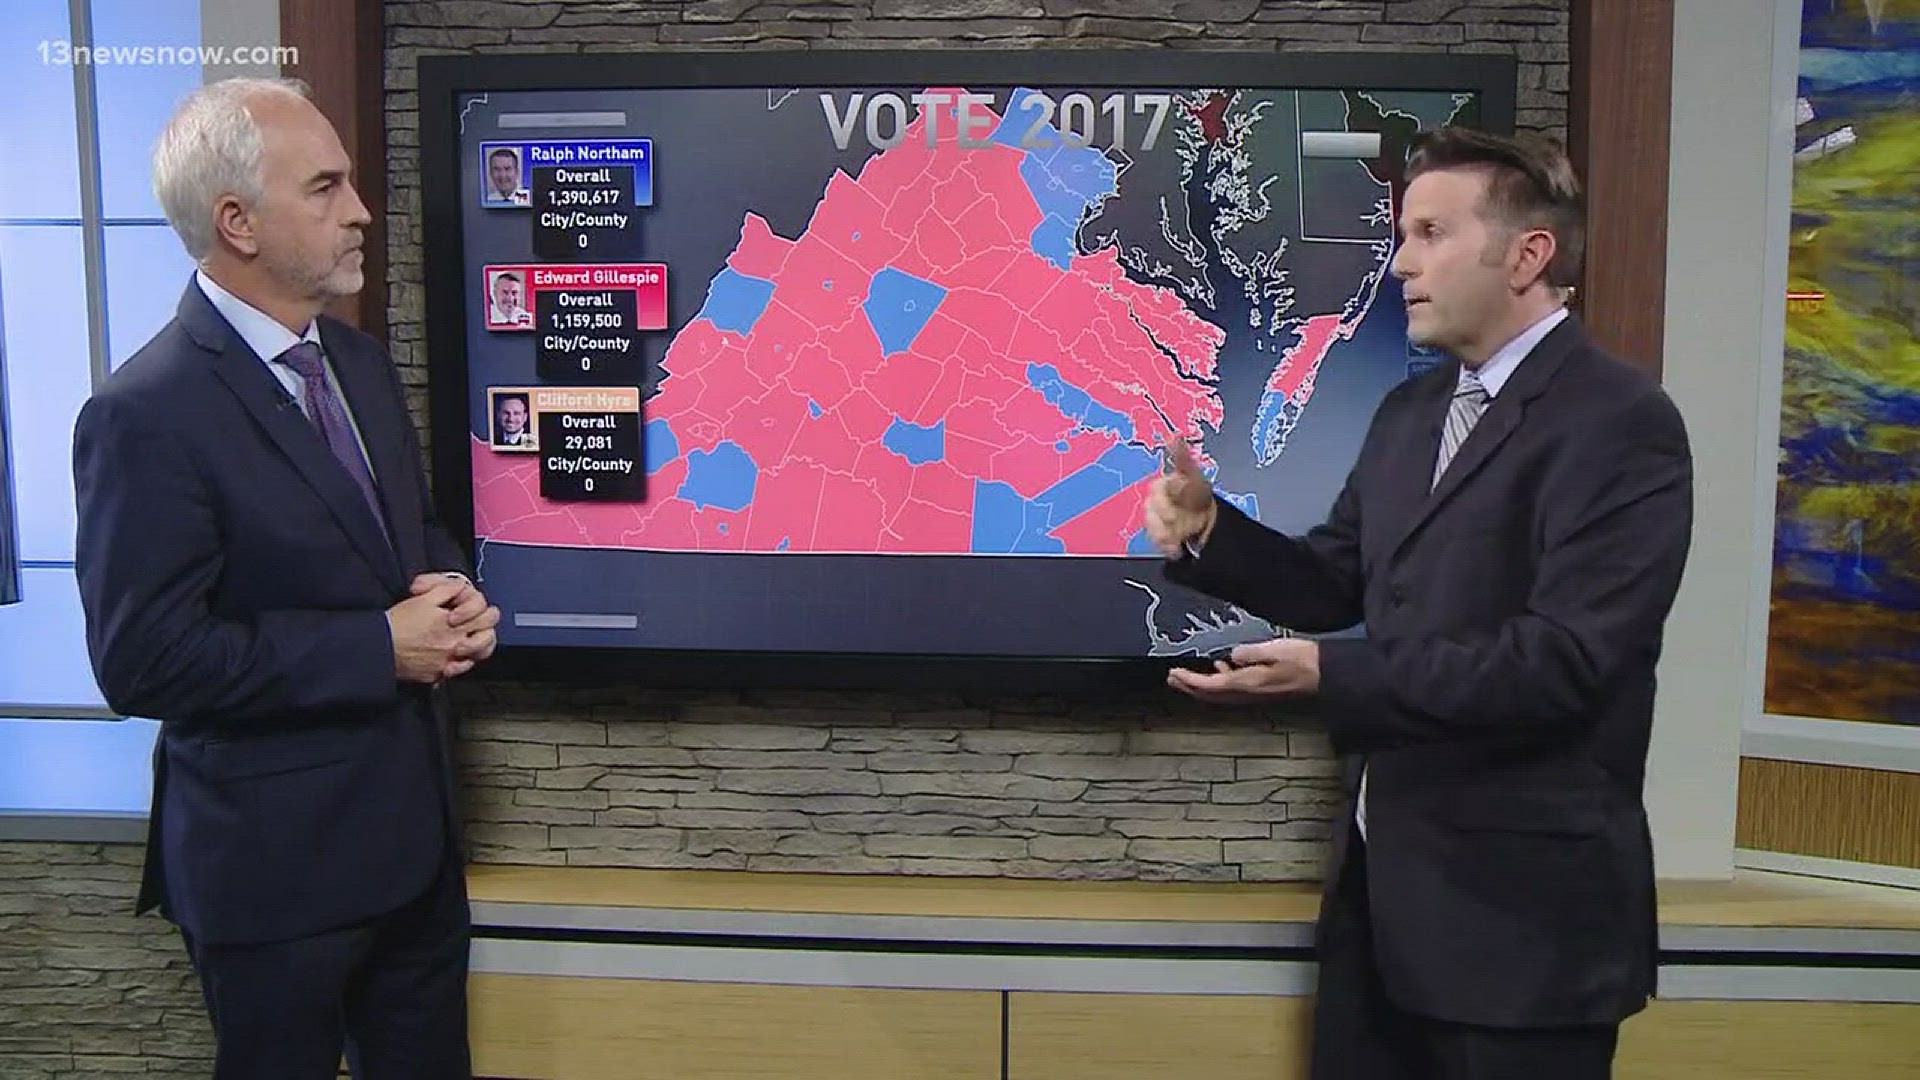 13News Now political analyst, Doctor Quentin Kidd and Brian Farrell break down the jurisdictions votes